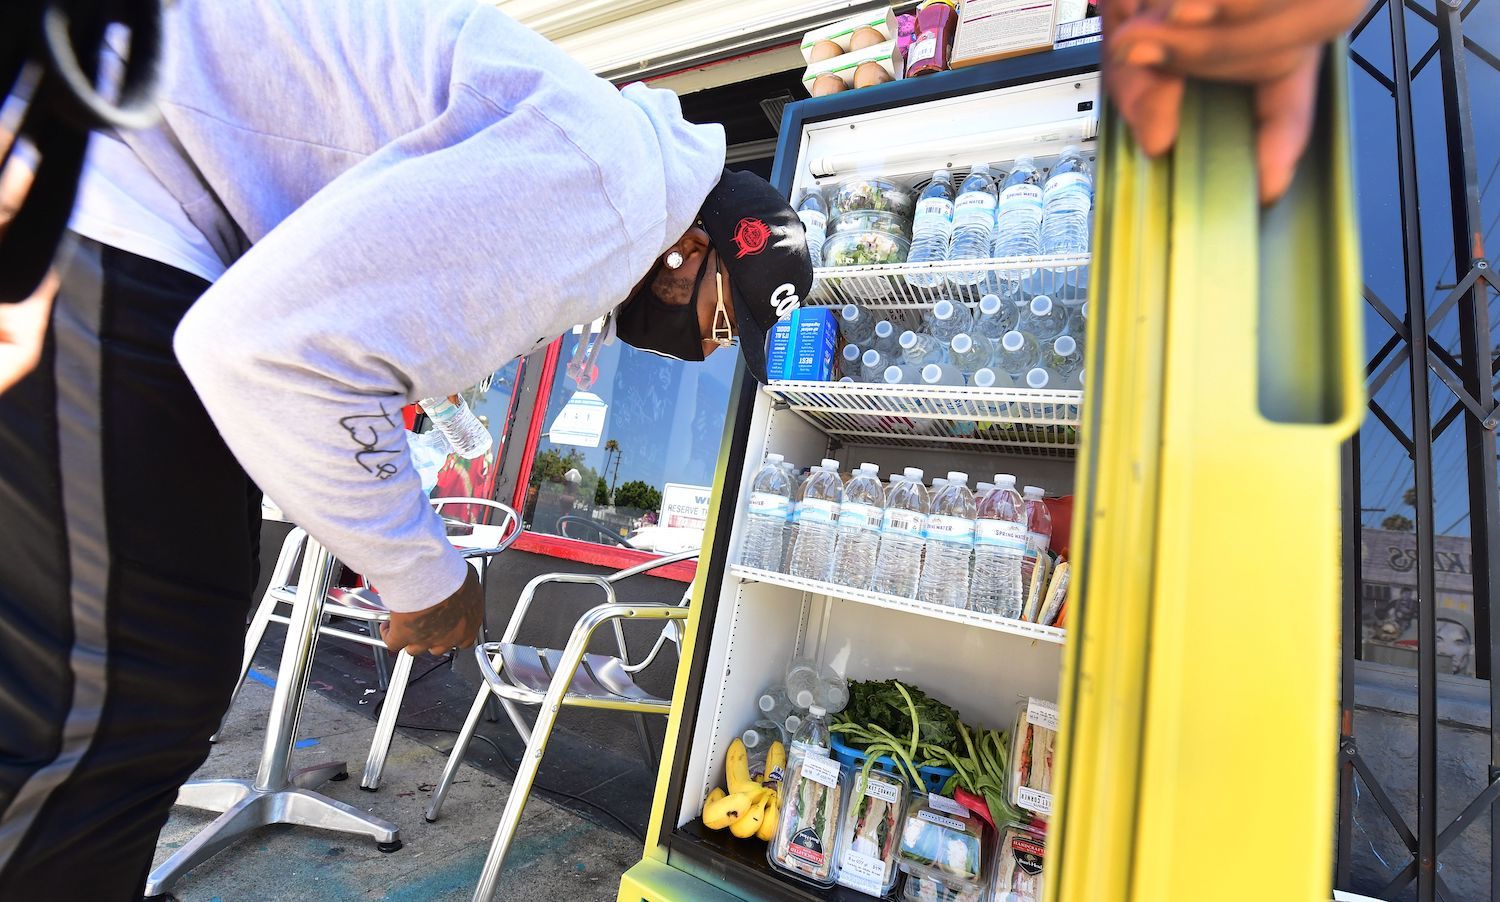 Solo Morris holds the fridge door open as Danny Dierich stocks it with more items on July 16, 2020 outside the Little Amsterdam Coffee shop in Los Angeles, California. October 2021